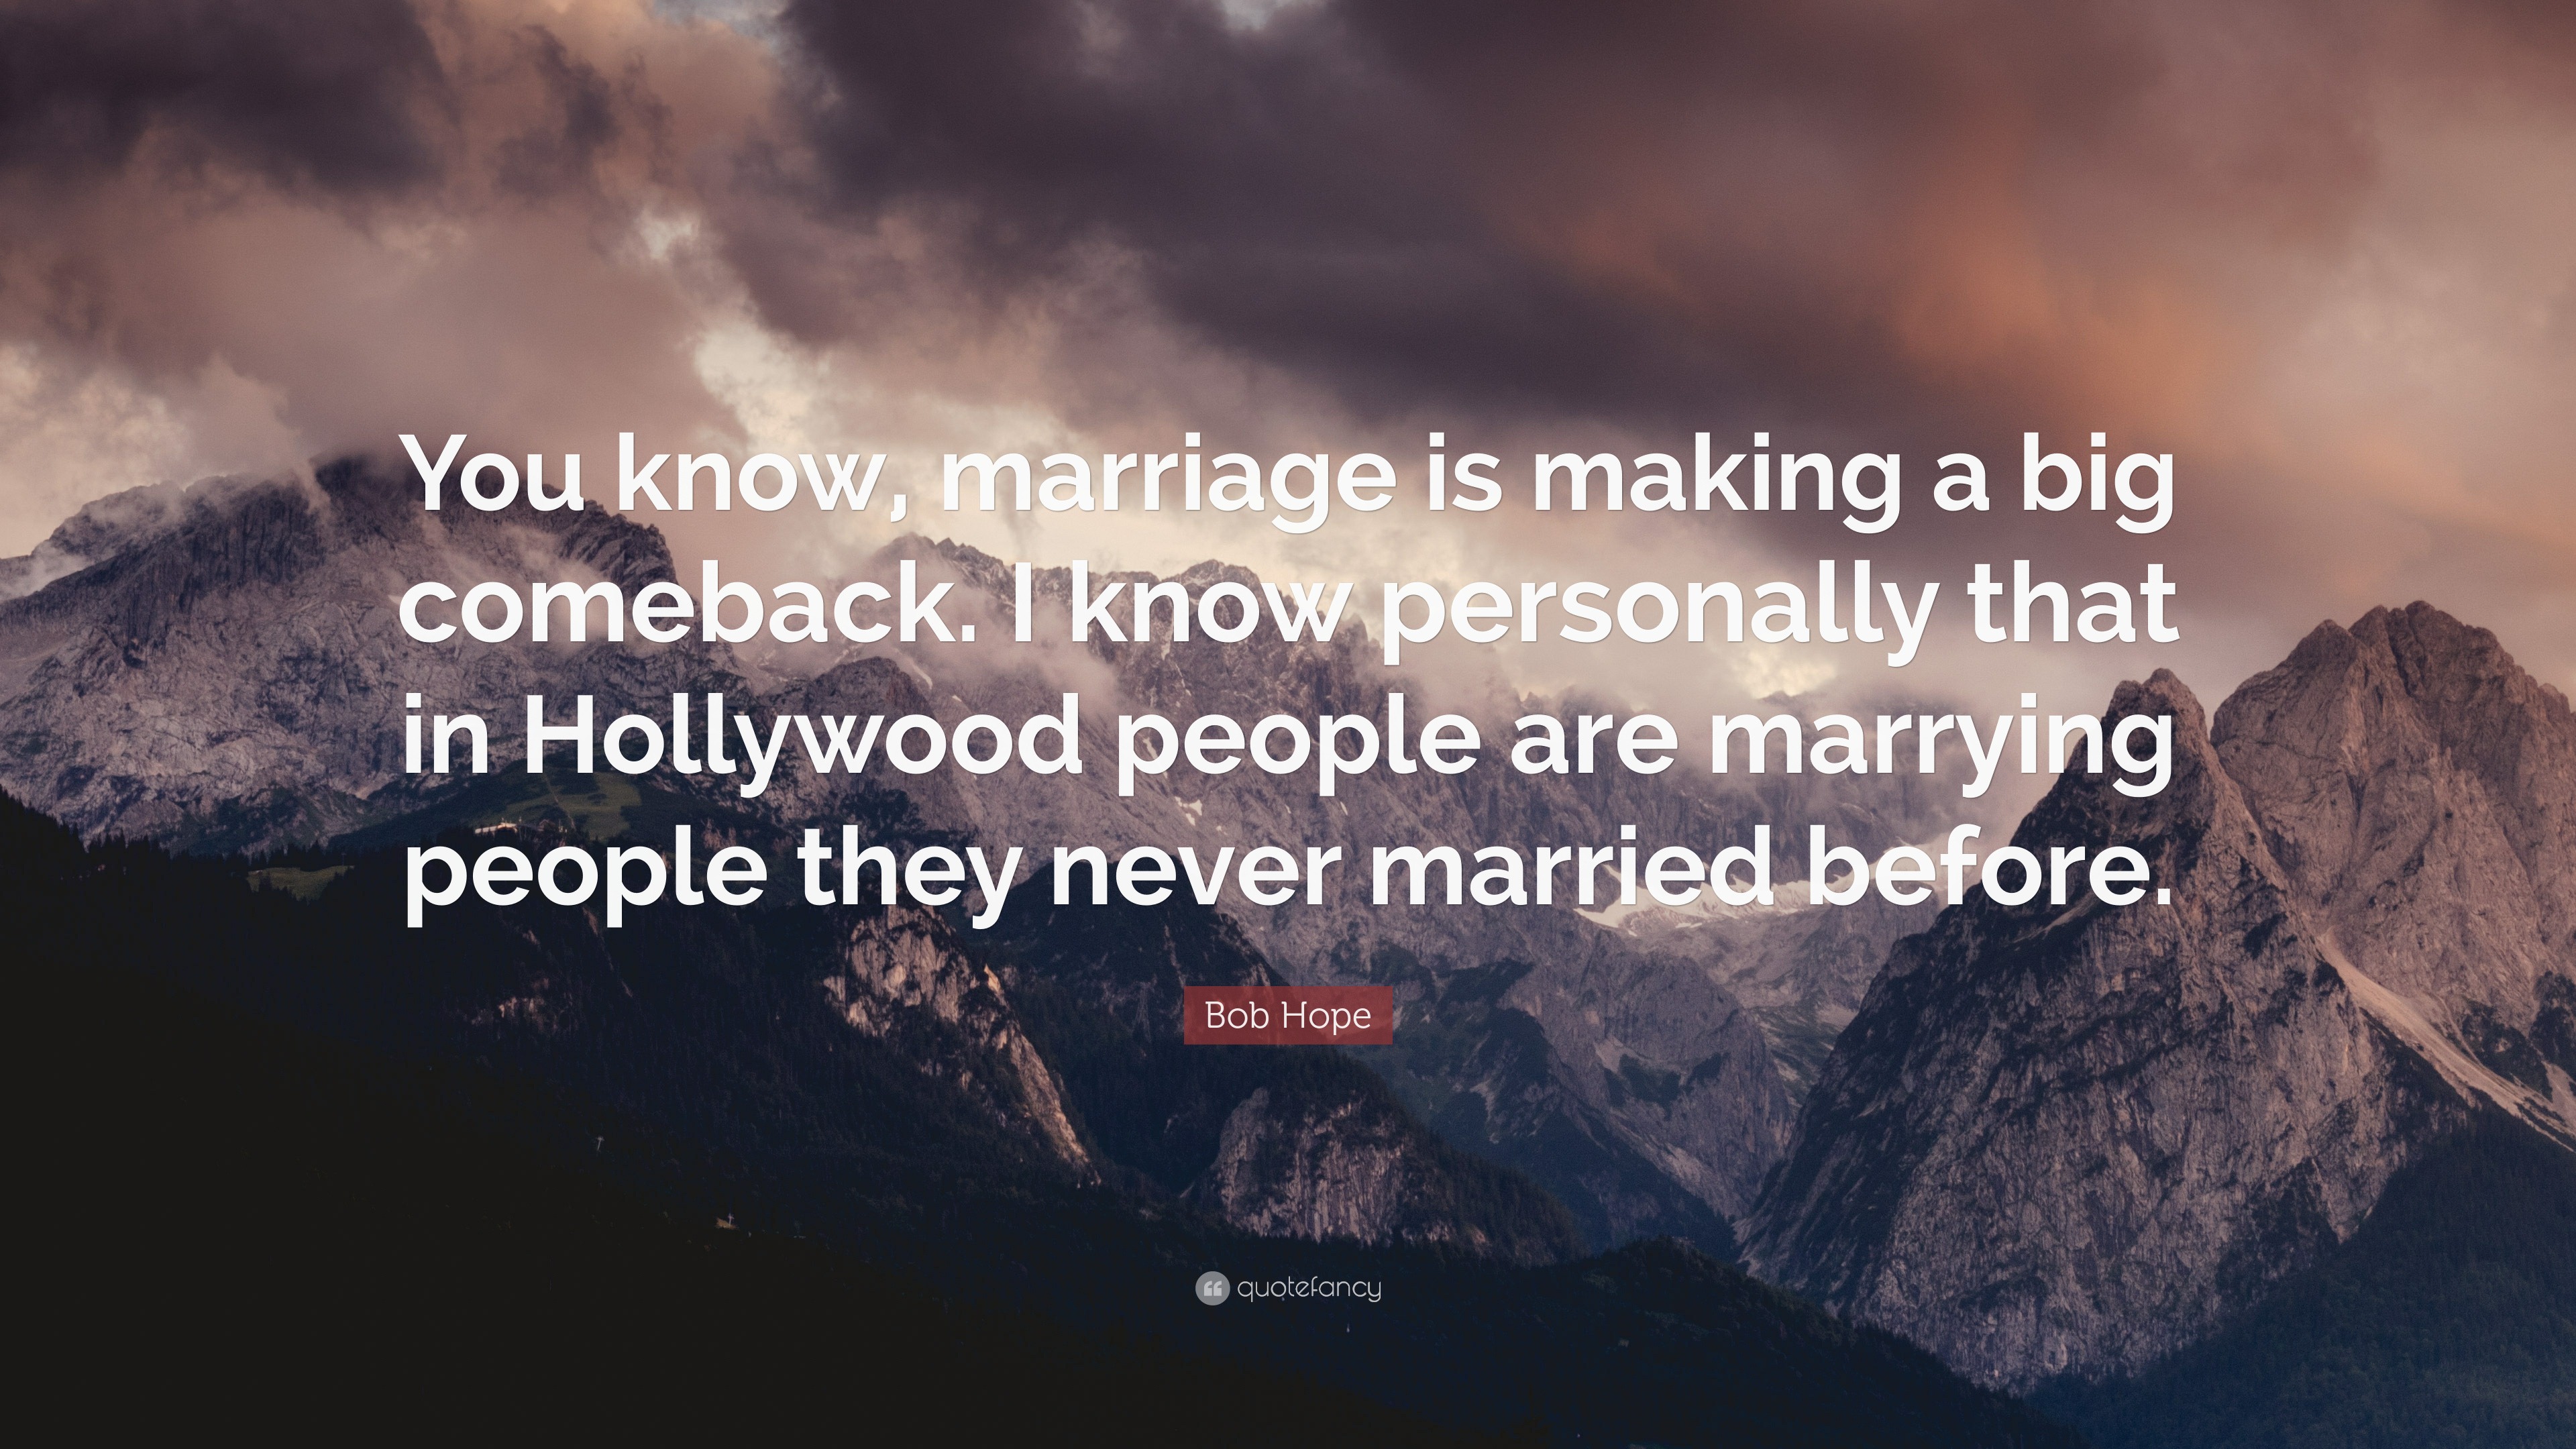 Bob Hope Quote: “You Know, Marriage Is Making A Big Comeback. I Know Personally That In Hollywood People Are Marrying People They Never M...”